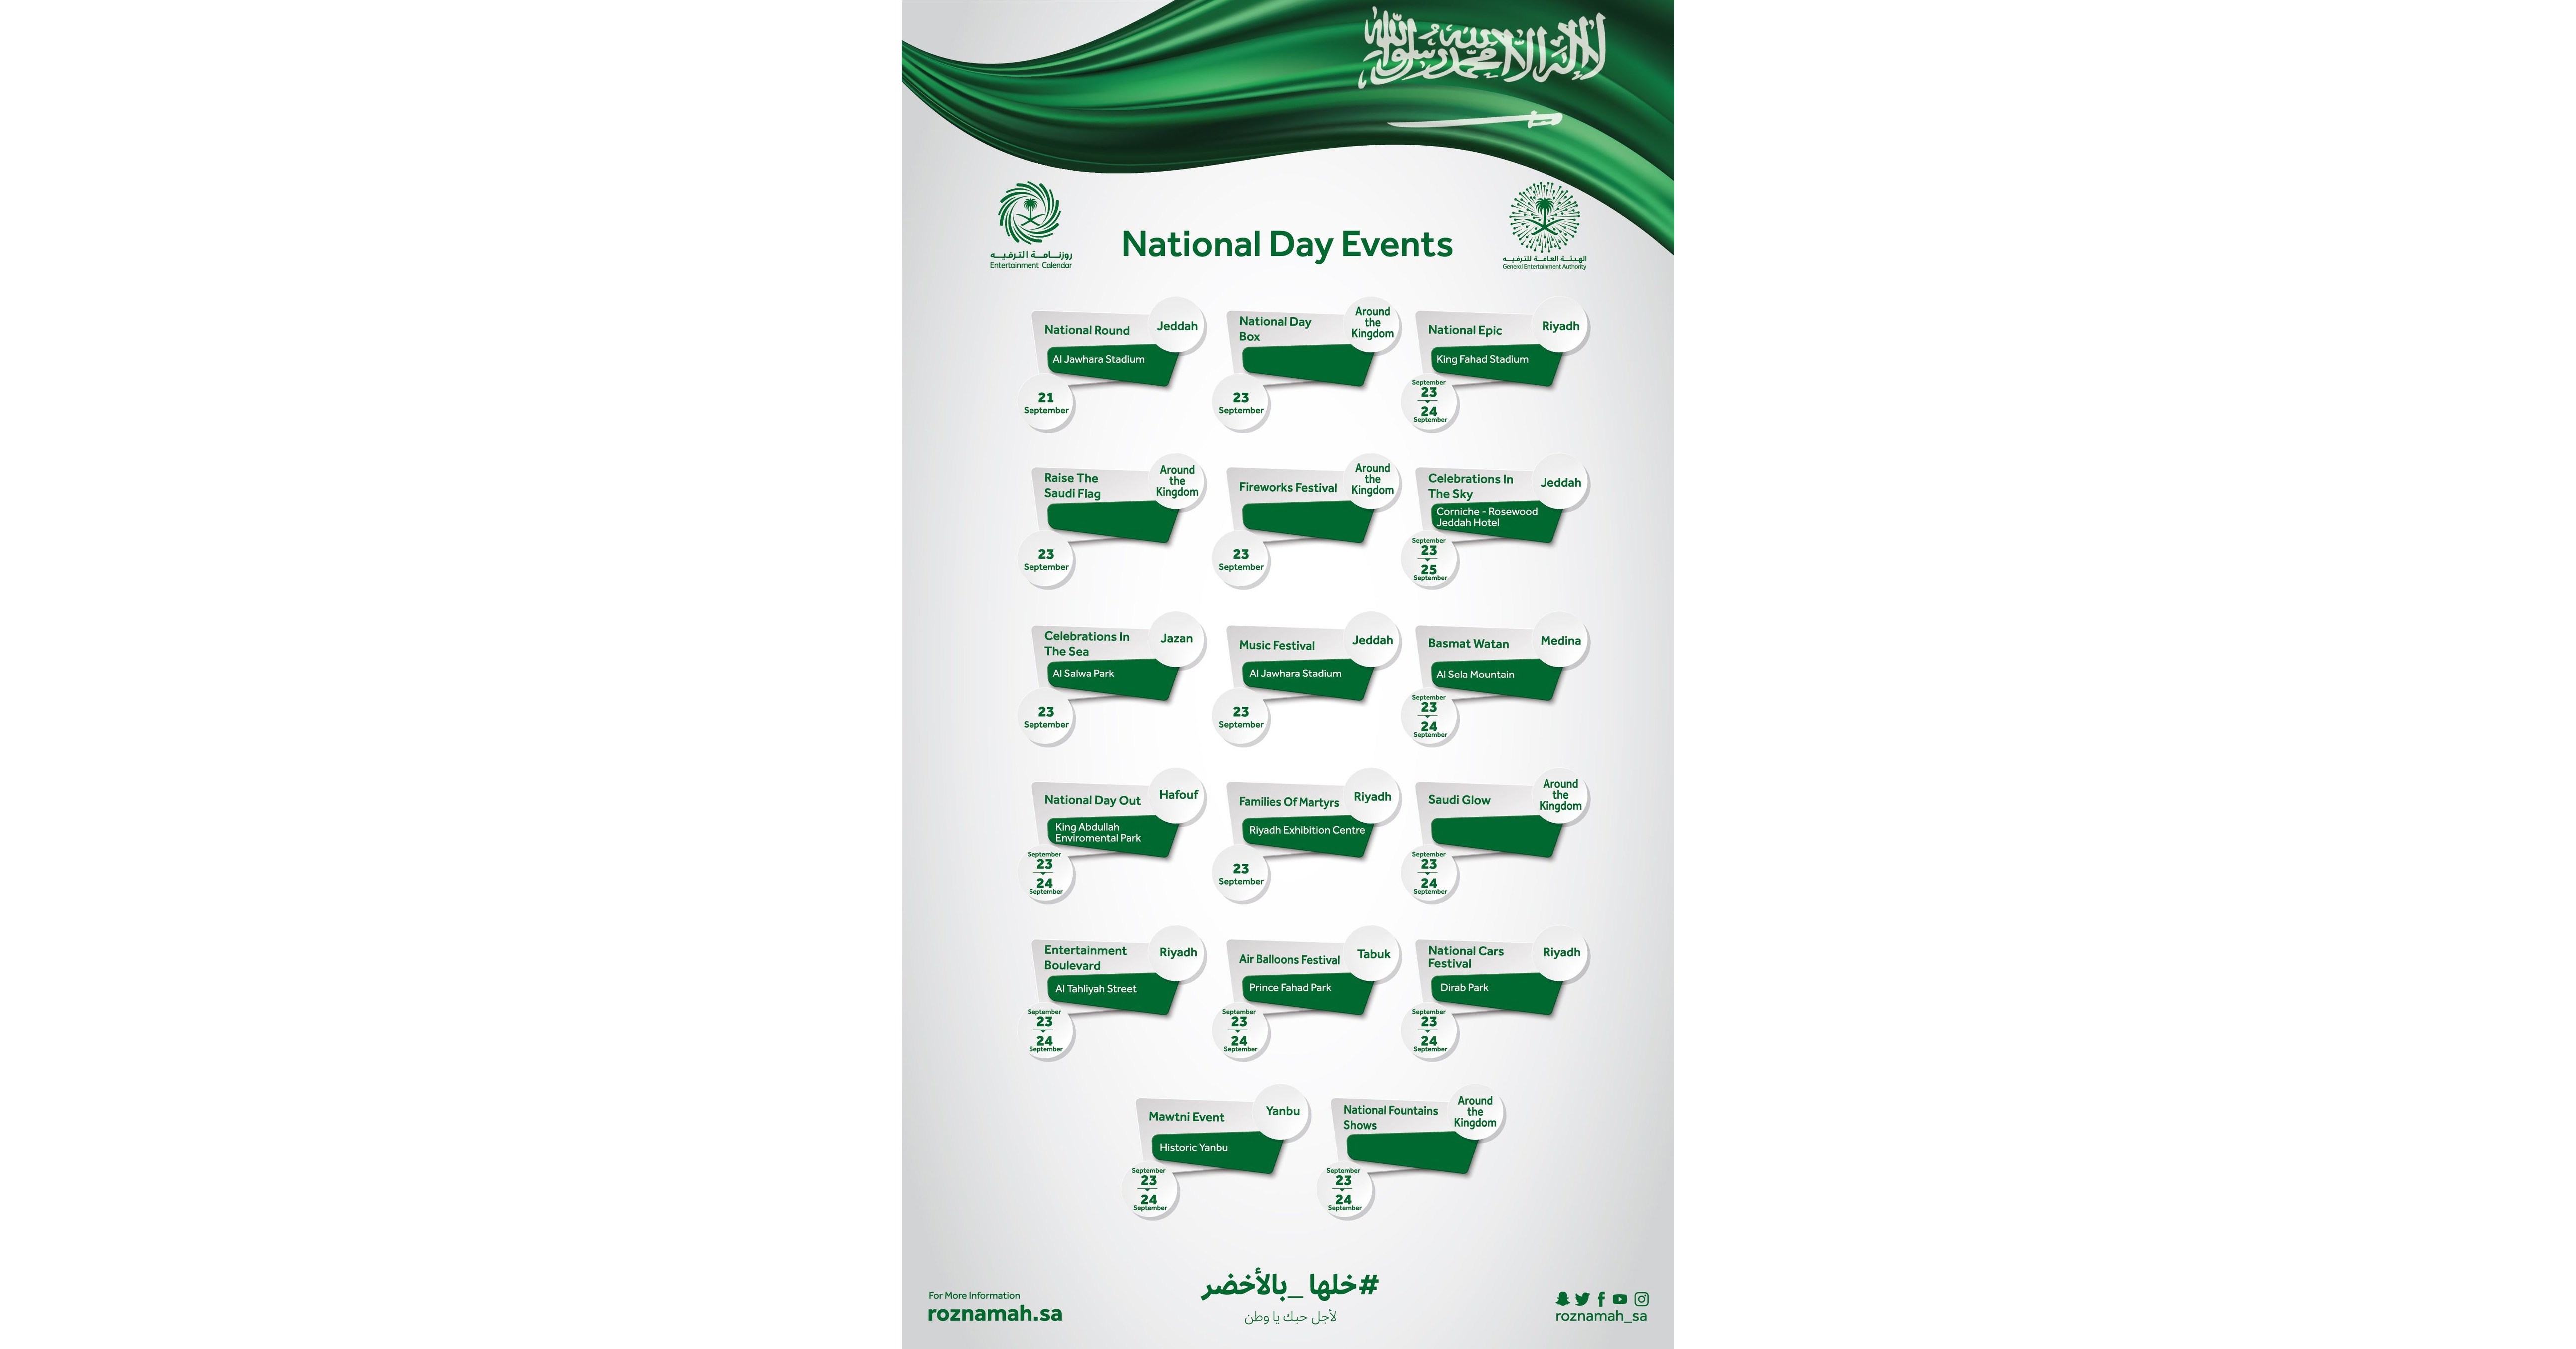 GEA Celebrates the 87th Saudi National Day With 27 Events in 17 Cities